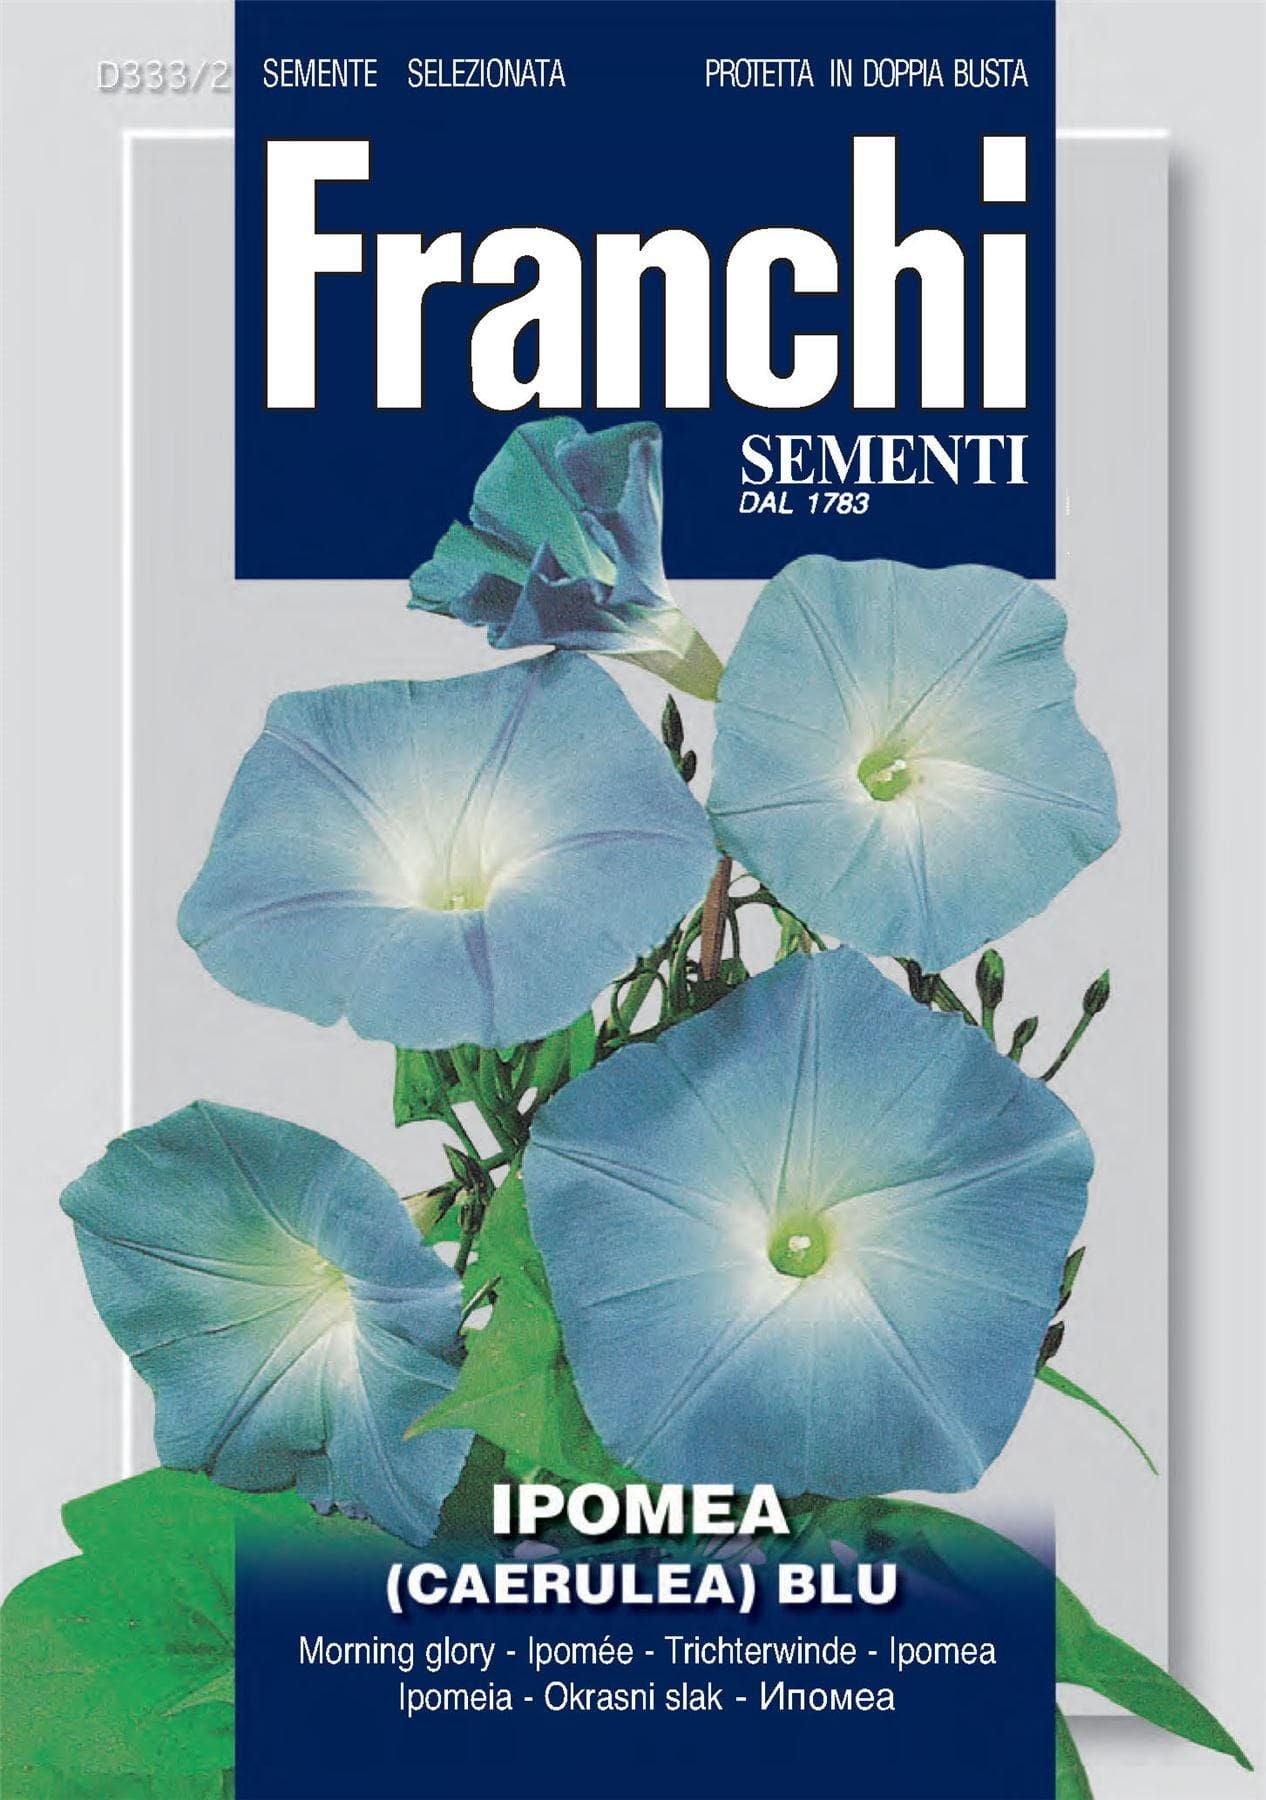 Franchi Seeds of Italy - Flower - FDBF_ 333-2 - Ipomea Blue - Morning Glory - Seeds